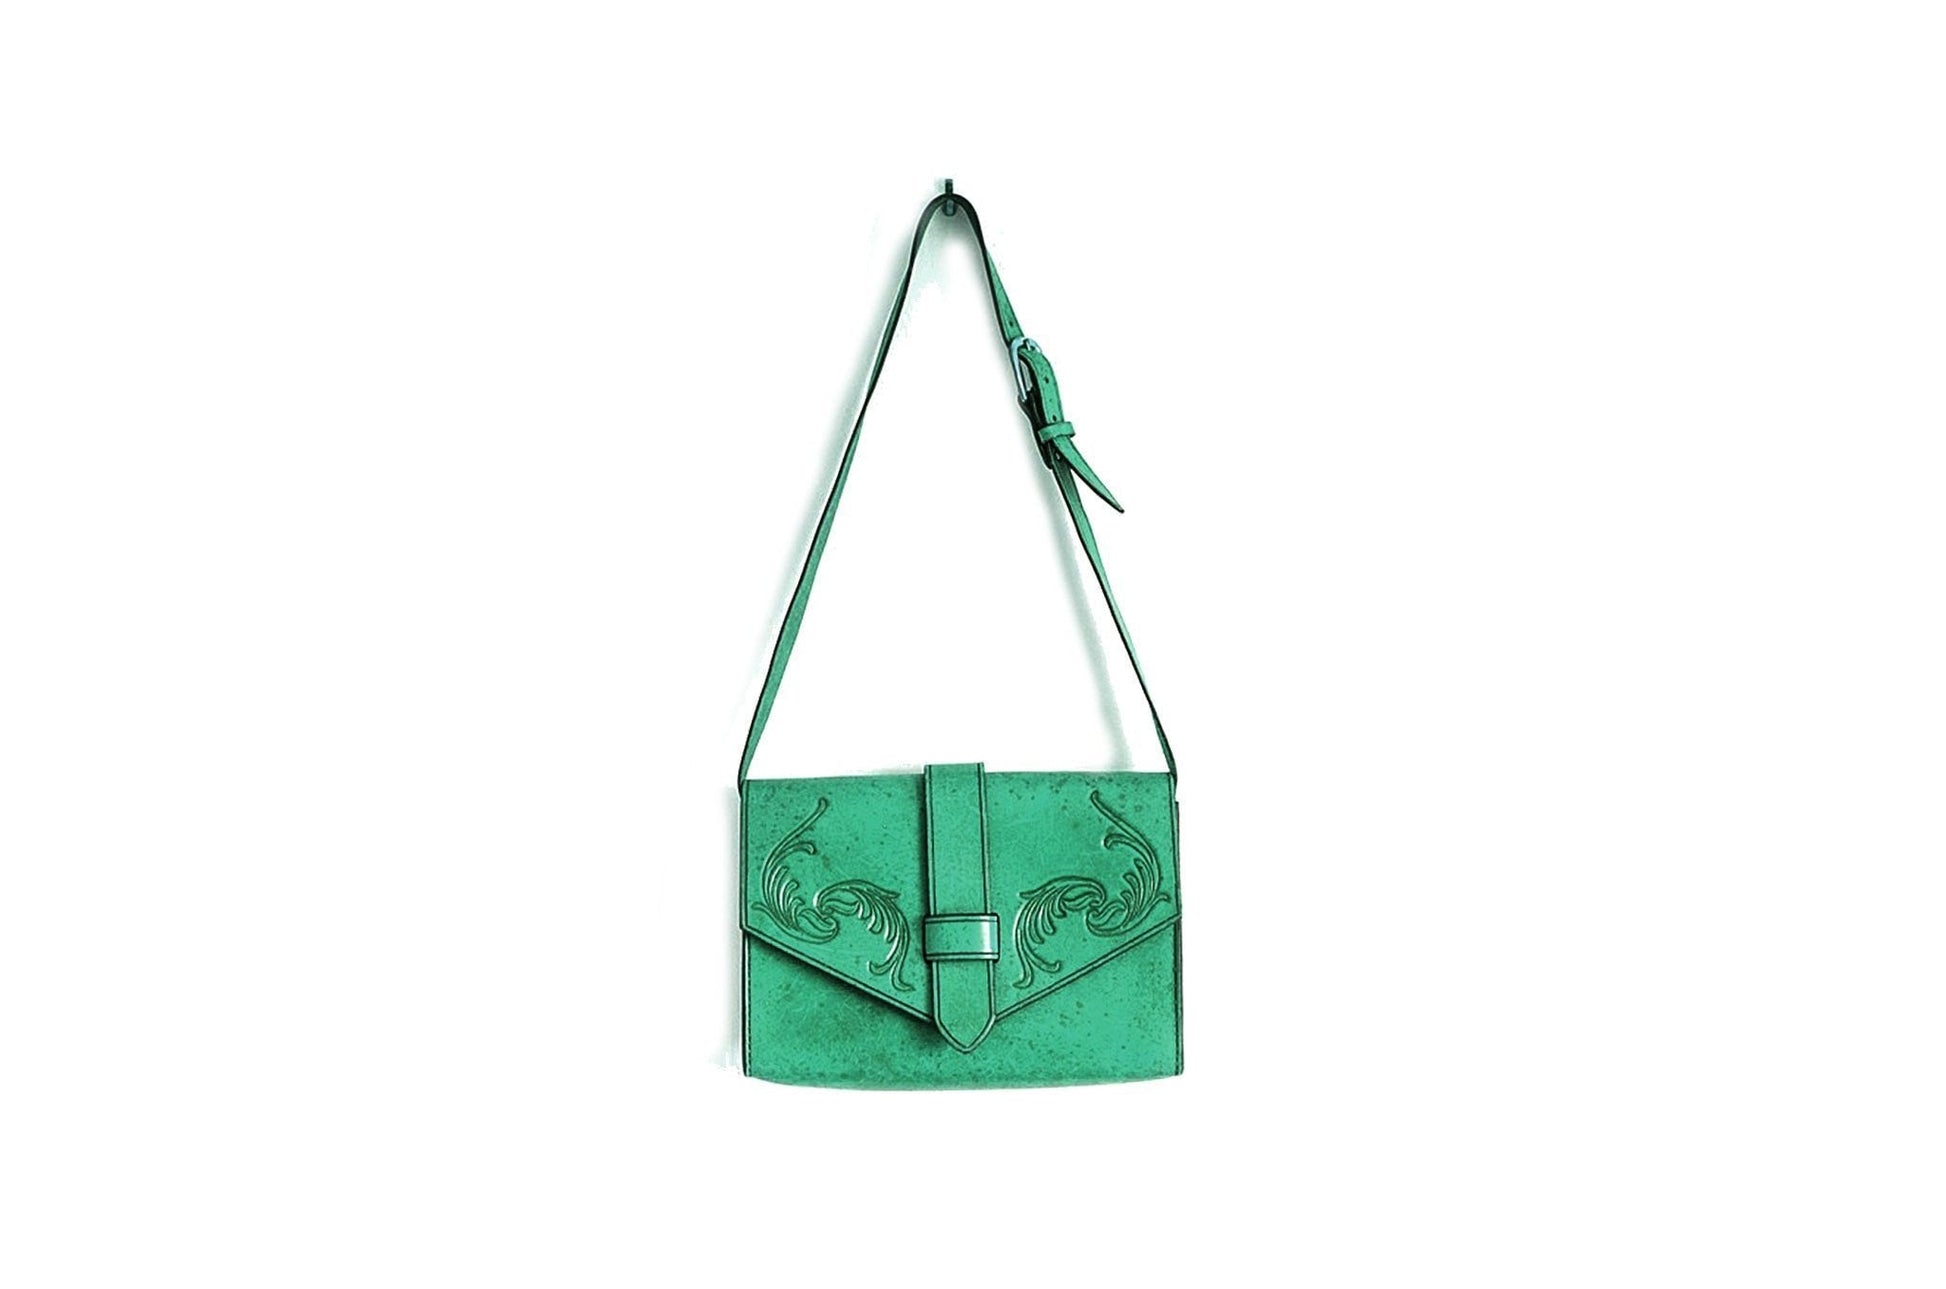 Artisanal Bags Dark Turquoise Leather Foldover Bag - Multiple Colors A799446